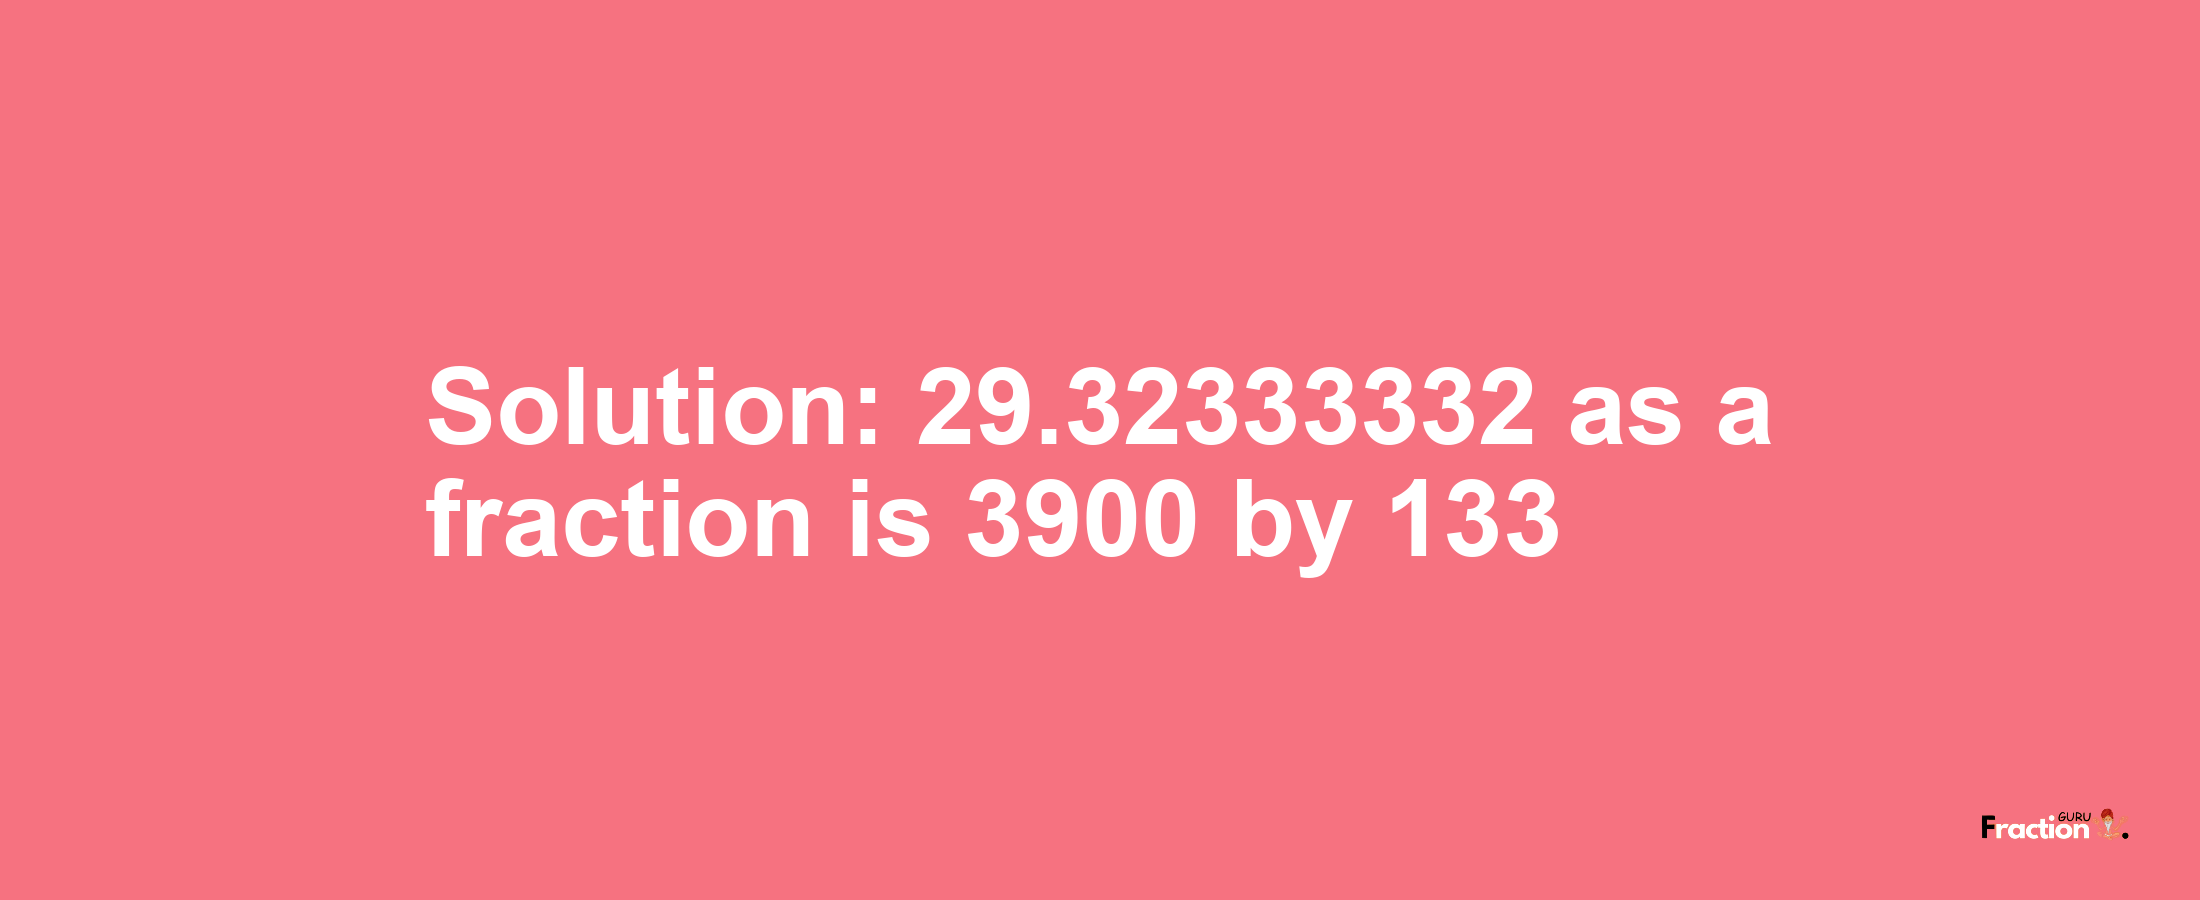 Solution:29.32333332 as a fraction is 3900/133